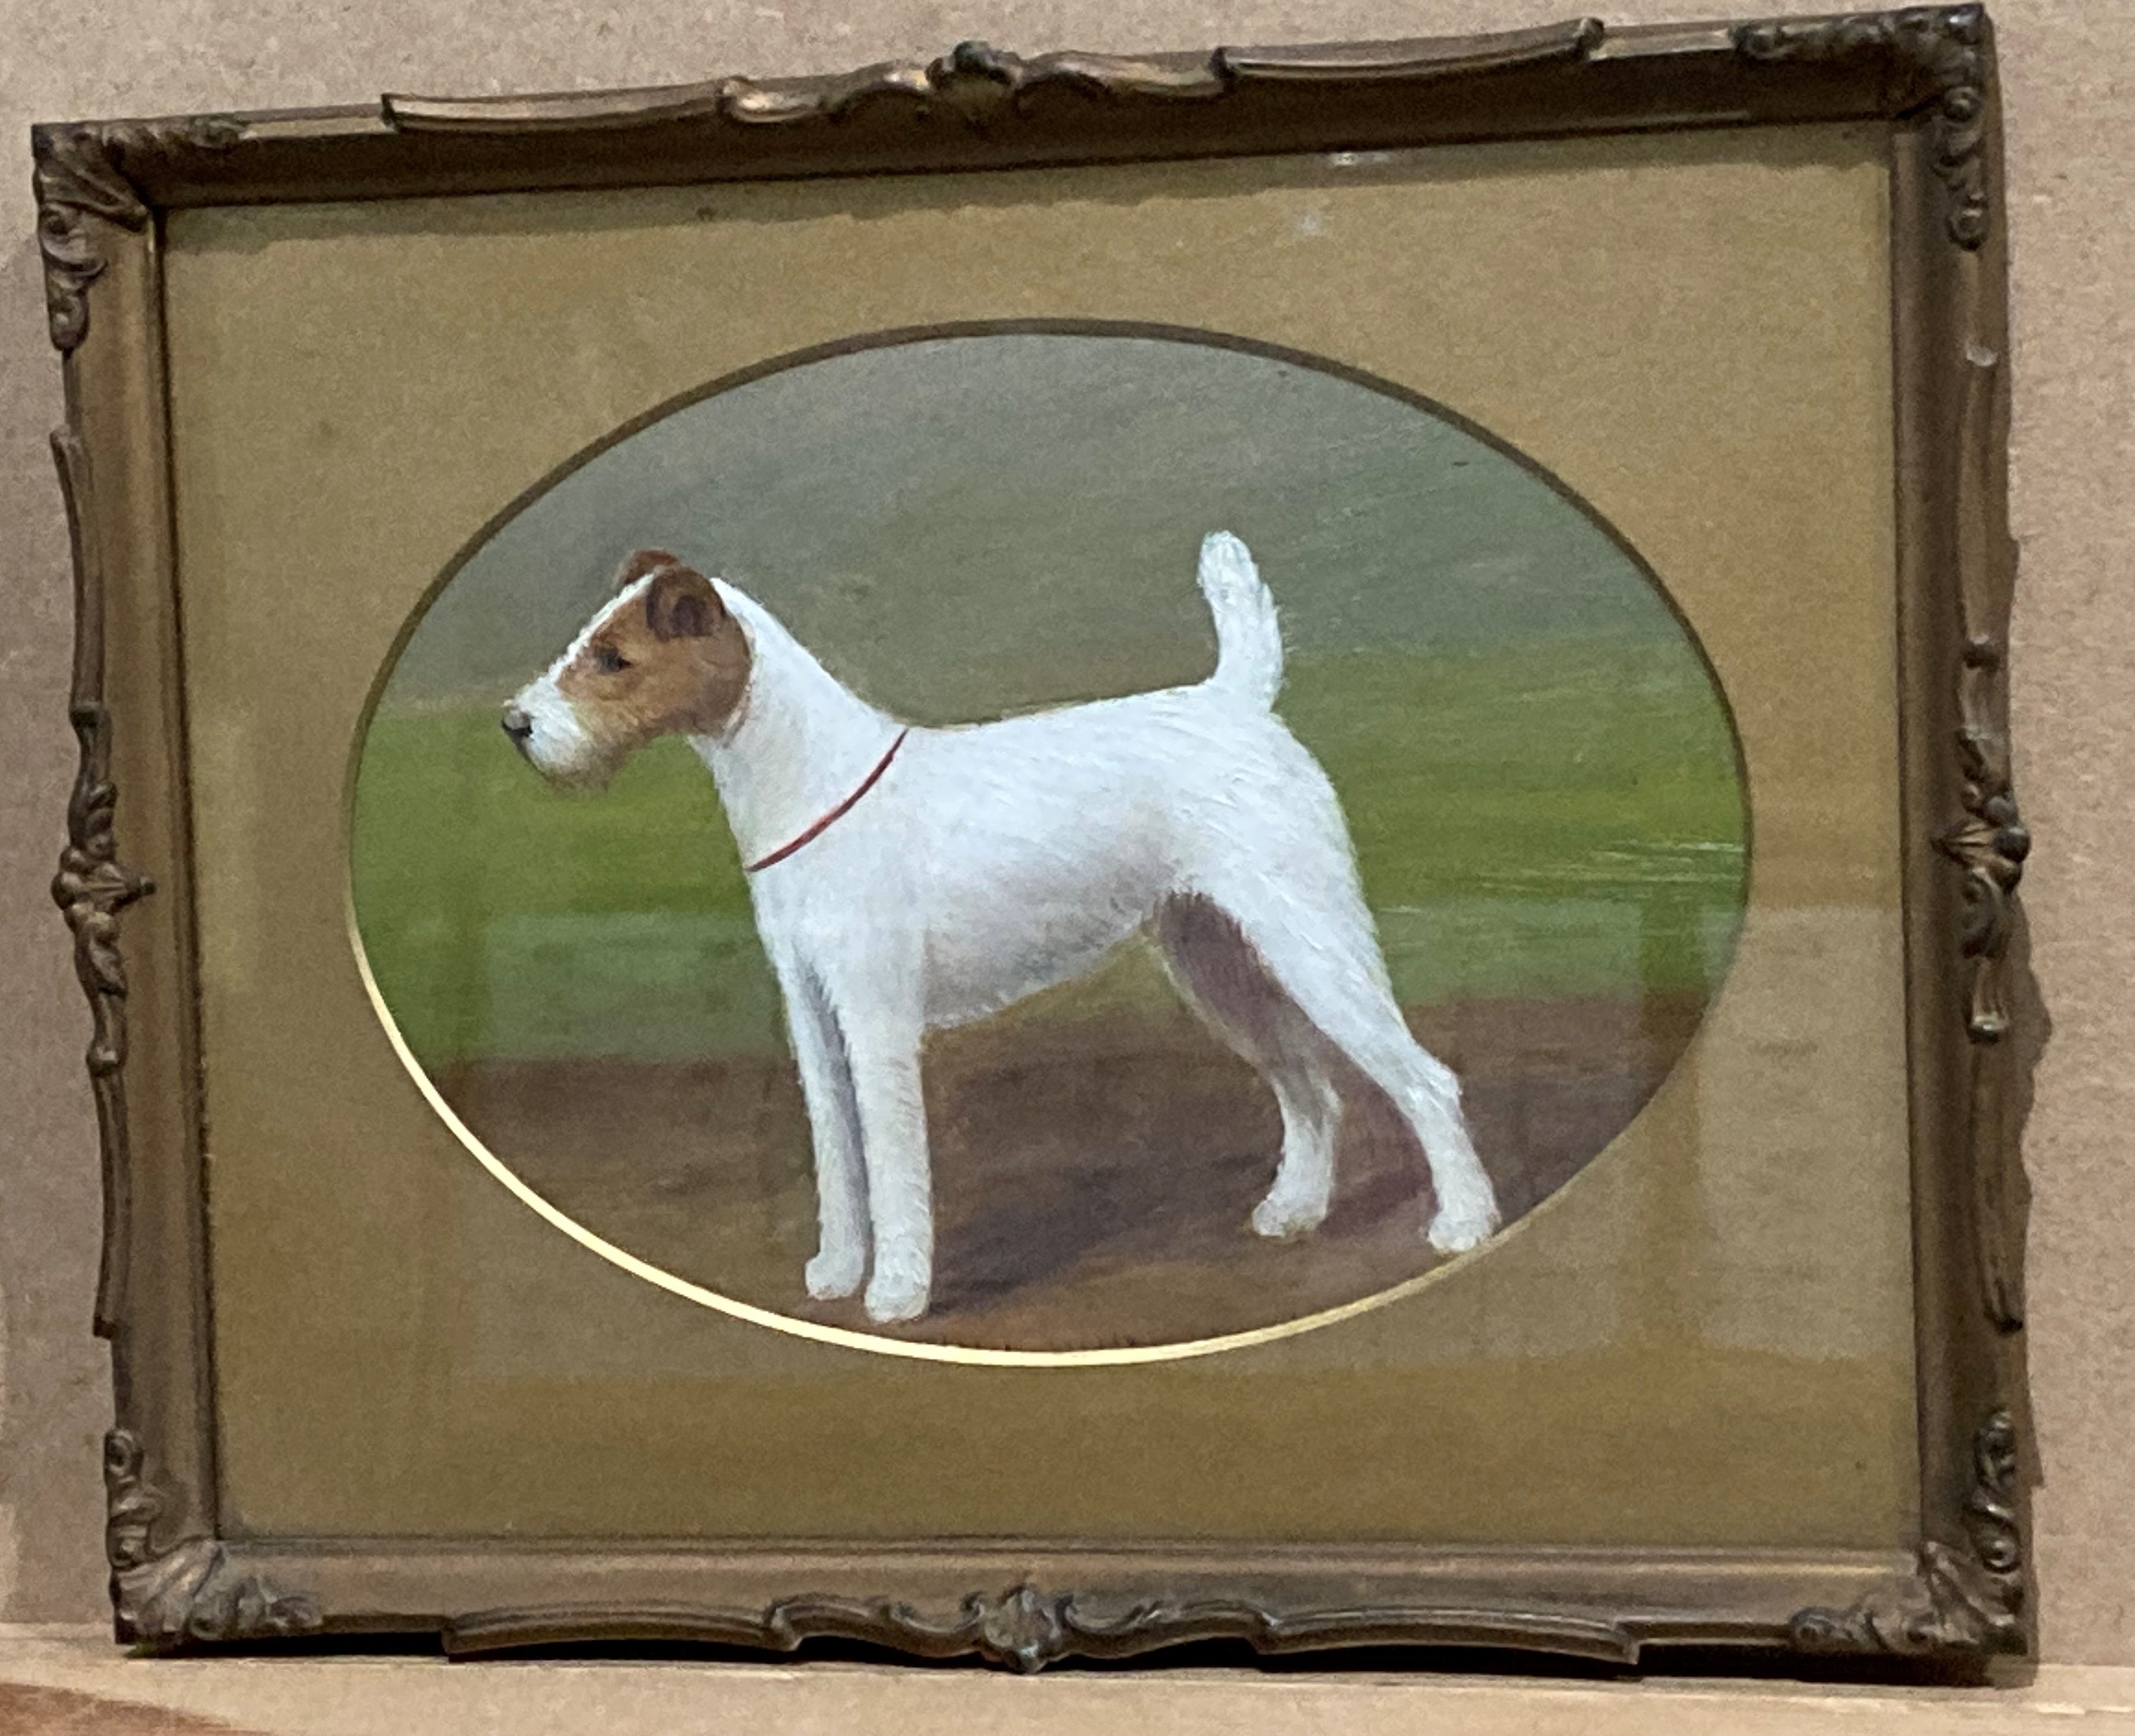 H Crowther 1923, 'Stapenhill Wiregirls Legacy', study of a fox terrier, oil on canvas, - Image 10 of 32